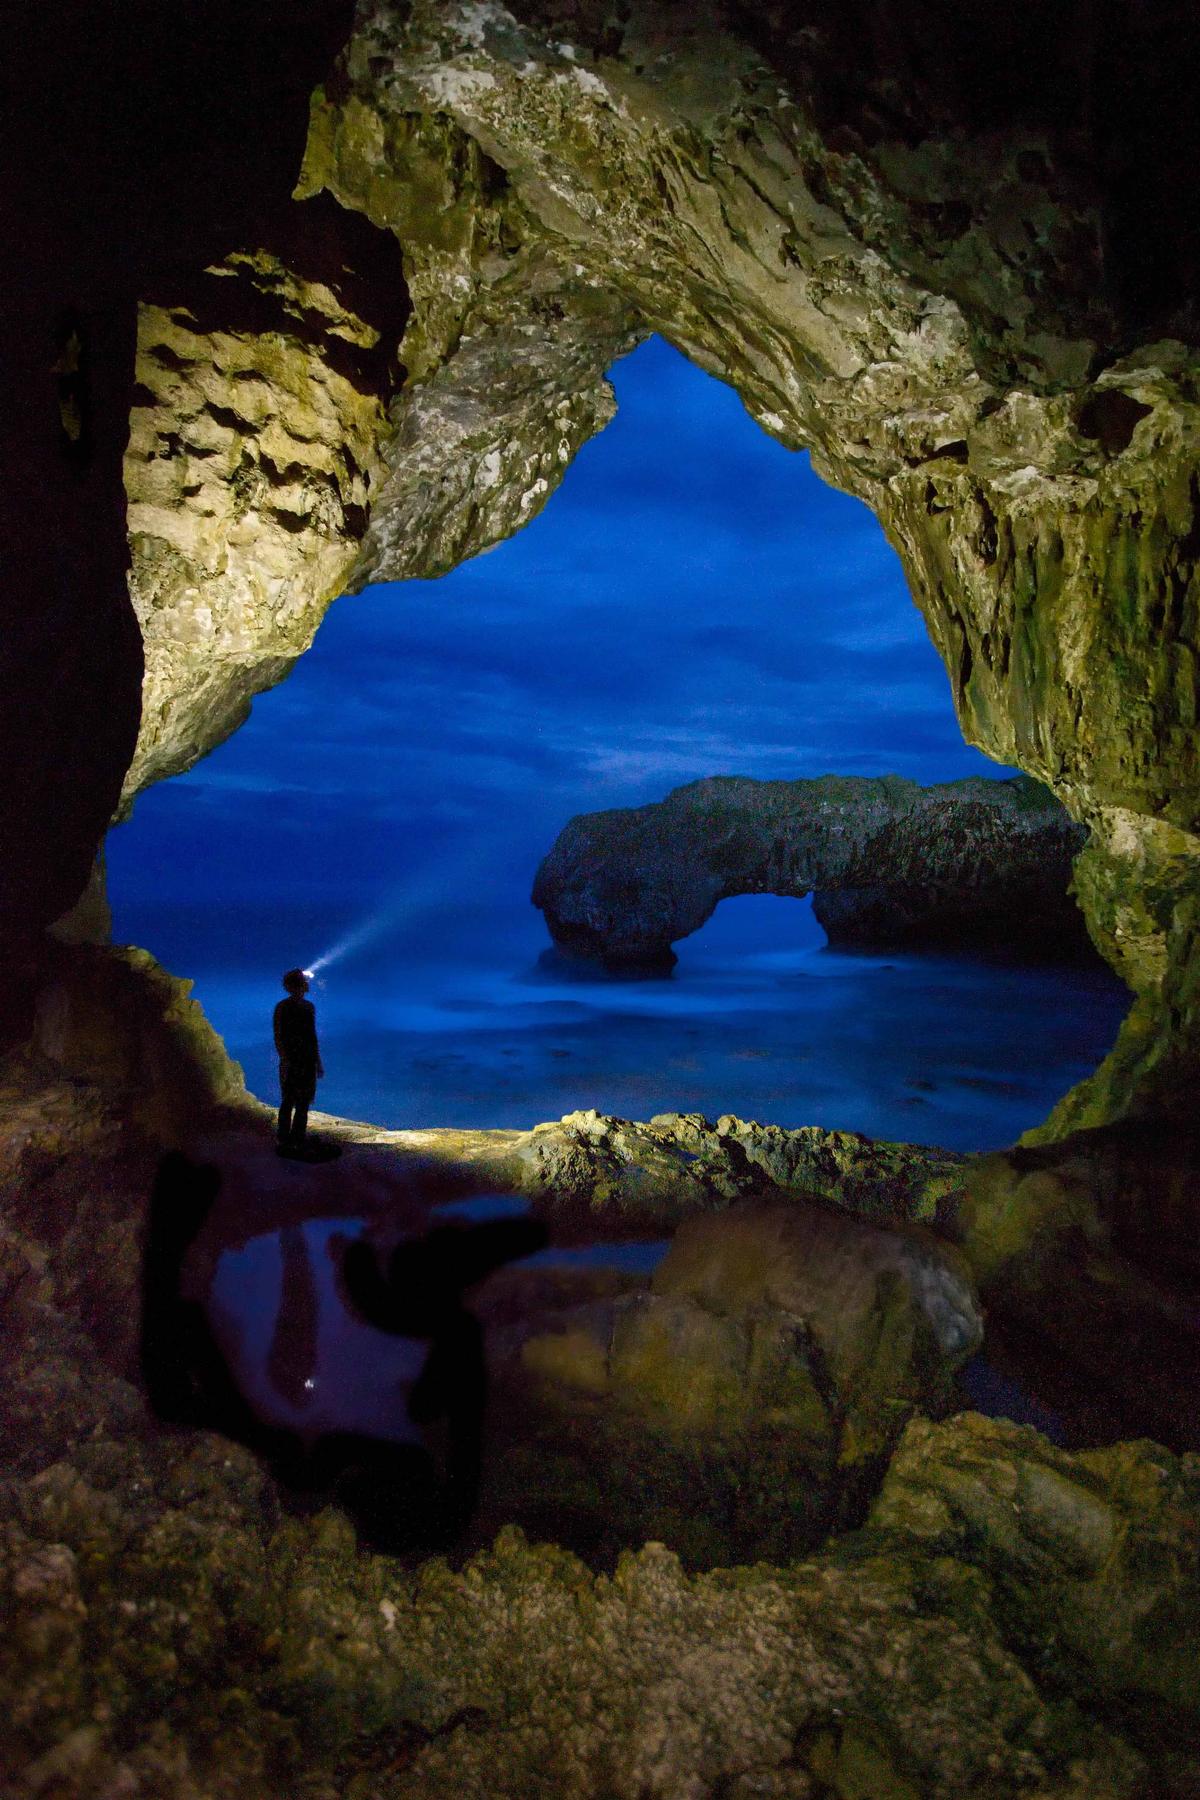 A self-portrait of Paul Zizka at Talava Arches, Niue (Caters News)